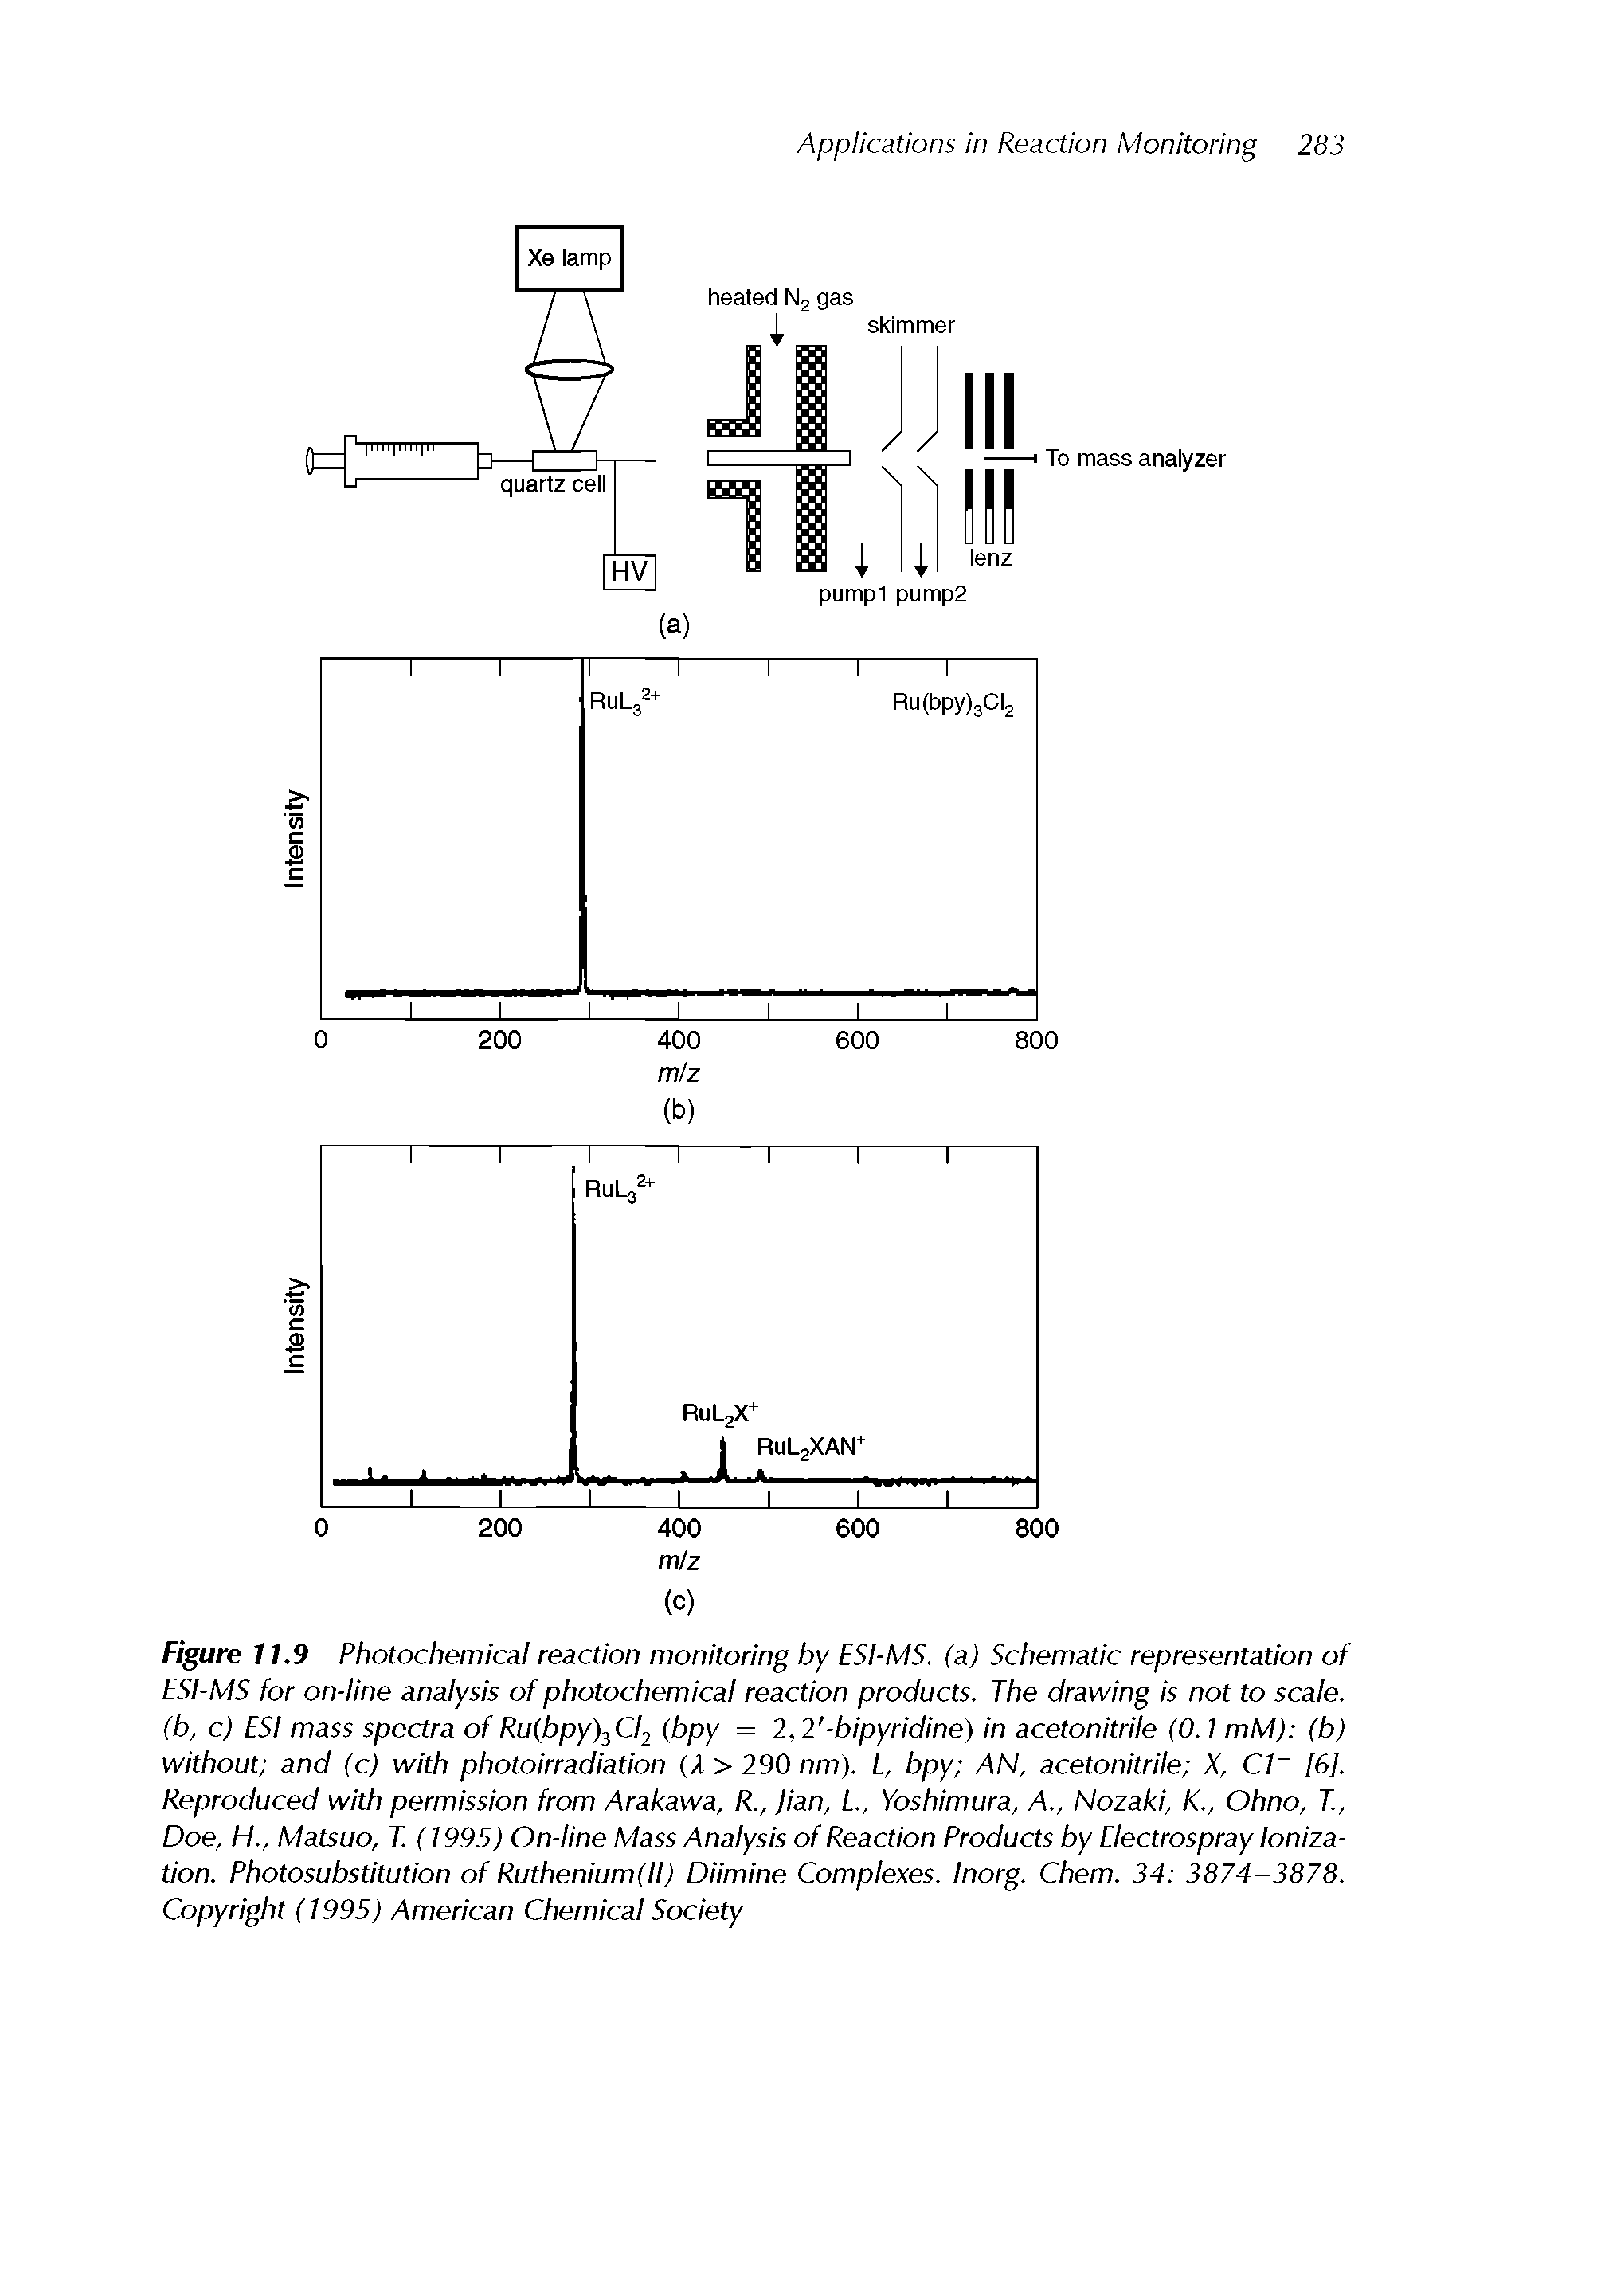 Figure 11.9 Photochemicai reaction monitoring by ESi-MS. (a) Schematic representation of ESI-MS for on-iine anaiysis of photochemical reaction products. The drawing is not to scale, (b, c) ESi mass spectra of Ru(bpy) Cl2 (bpy = 2,2 -bipyridine) in acetonitrile (0.1 mM) (b) without and (c) with photoirradiation (A > 290 nm). L, bpy AN, acetonitrile X, C1 [6]. Reproduced with permission from Arakawa, R., jian, L., Yoshimura, A., Nozaki, K., Ohno, T, Doe, H., Matsuo, T. (1995) On-line Mass Analysis of Reaction Products by Electrospray Ionization. Photosubstitution of Ruthenium(ll) Diimine Complexes. Inorg. Chem. 34 3874-3878. Copyright (1995) American Chemical Society...